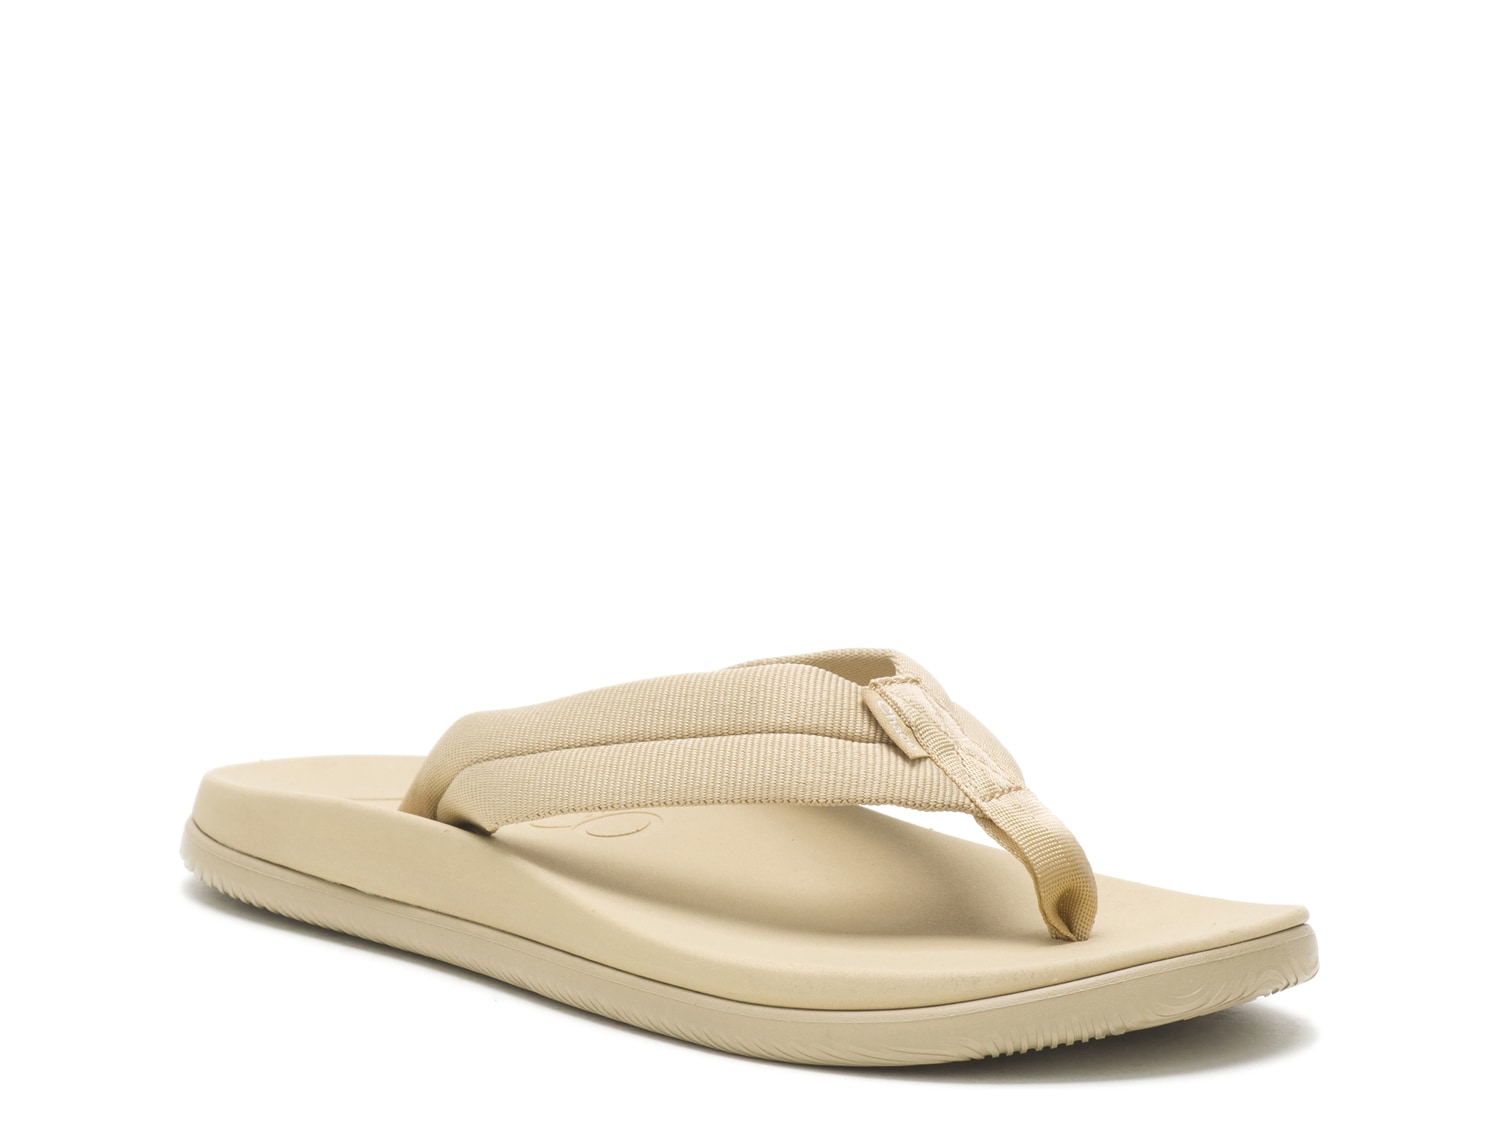 Chaco Chillos Flip Flop - Free Shipping | DSW